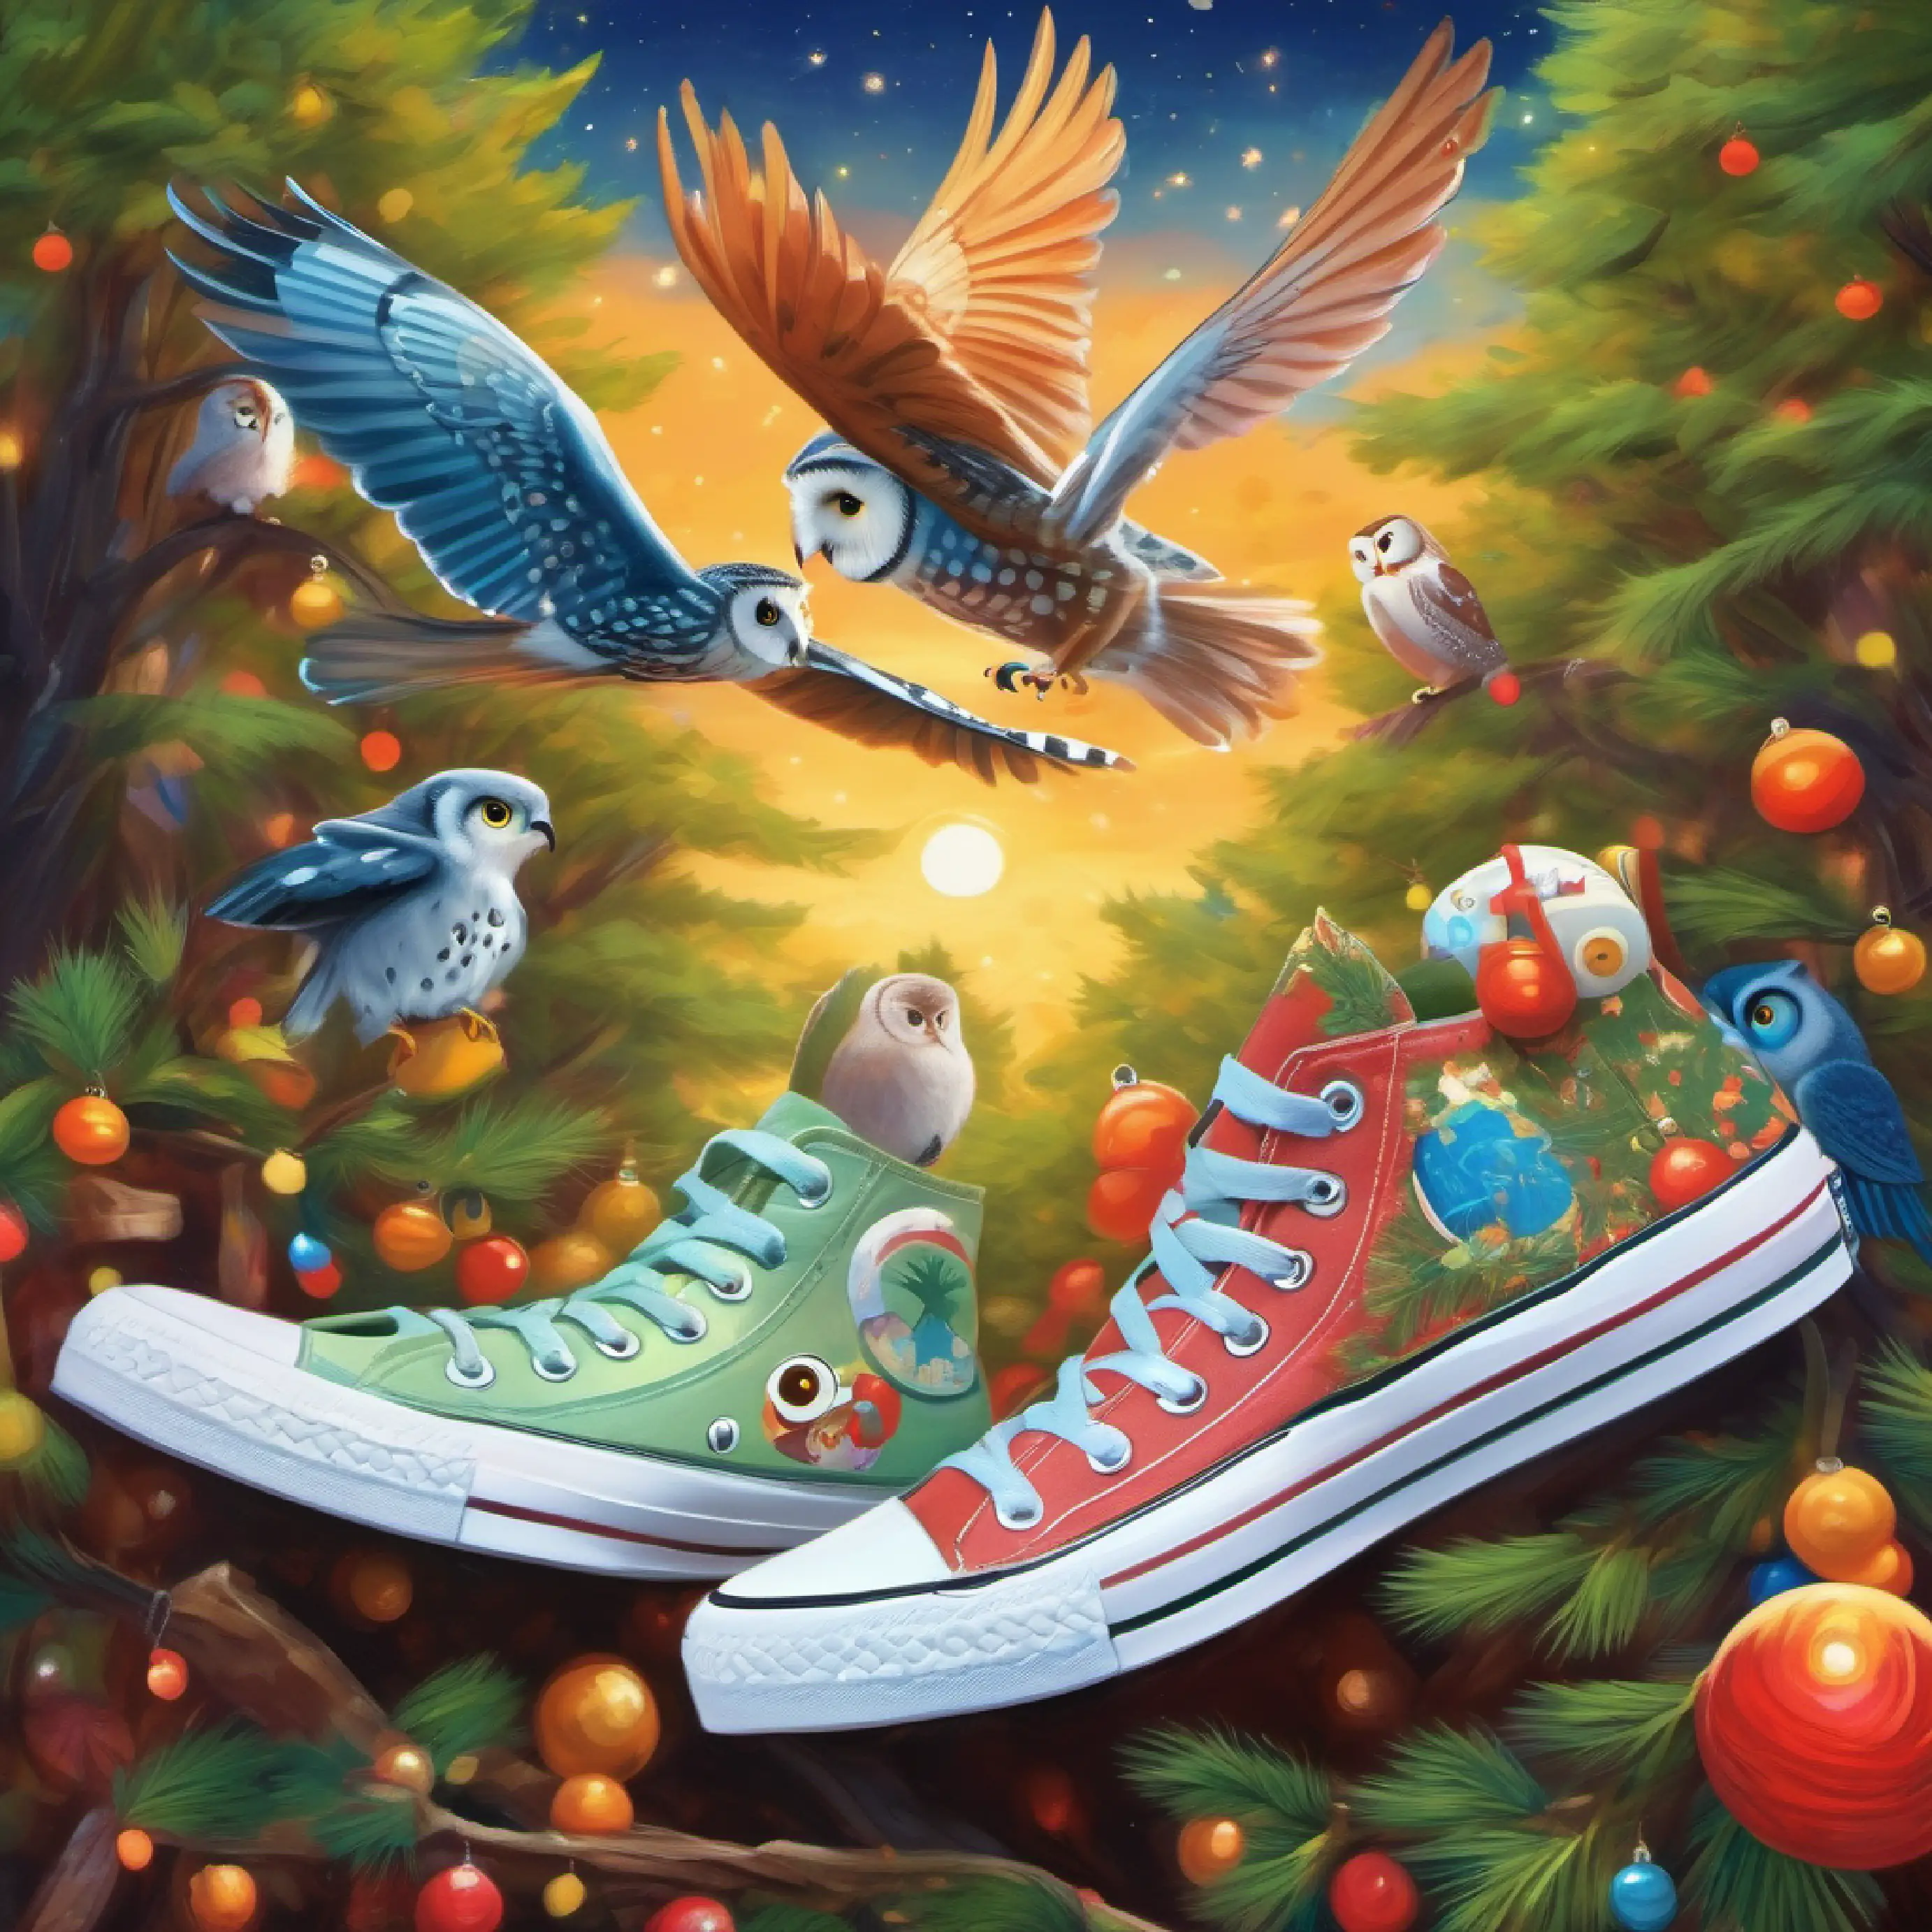 Characters in the dream movie converse with trees and seek the owl's wisdom.